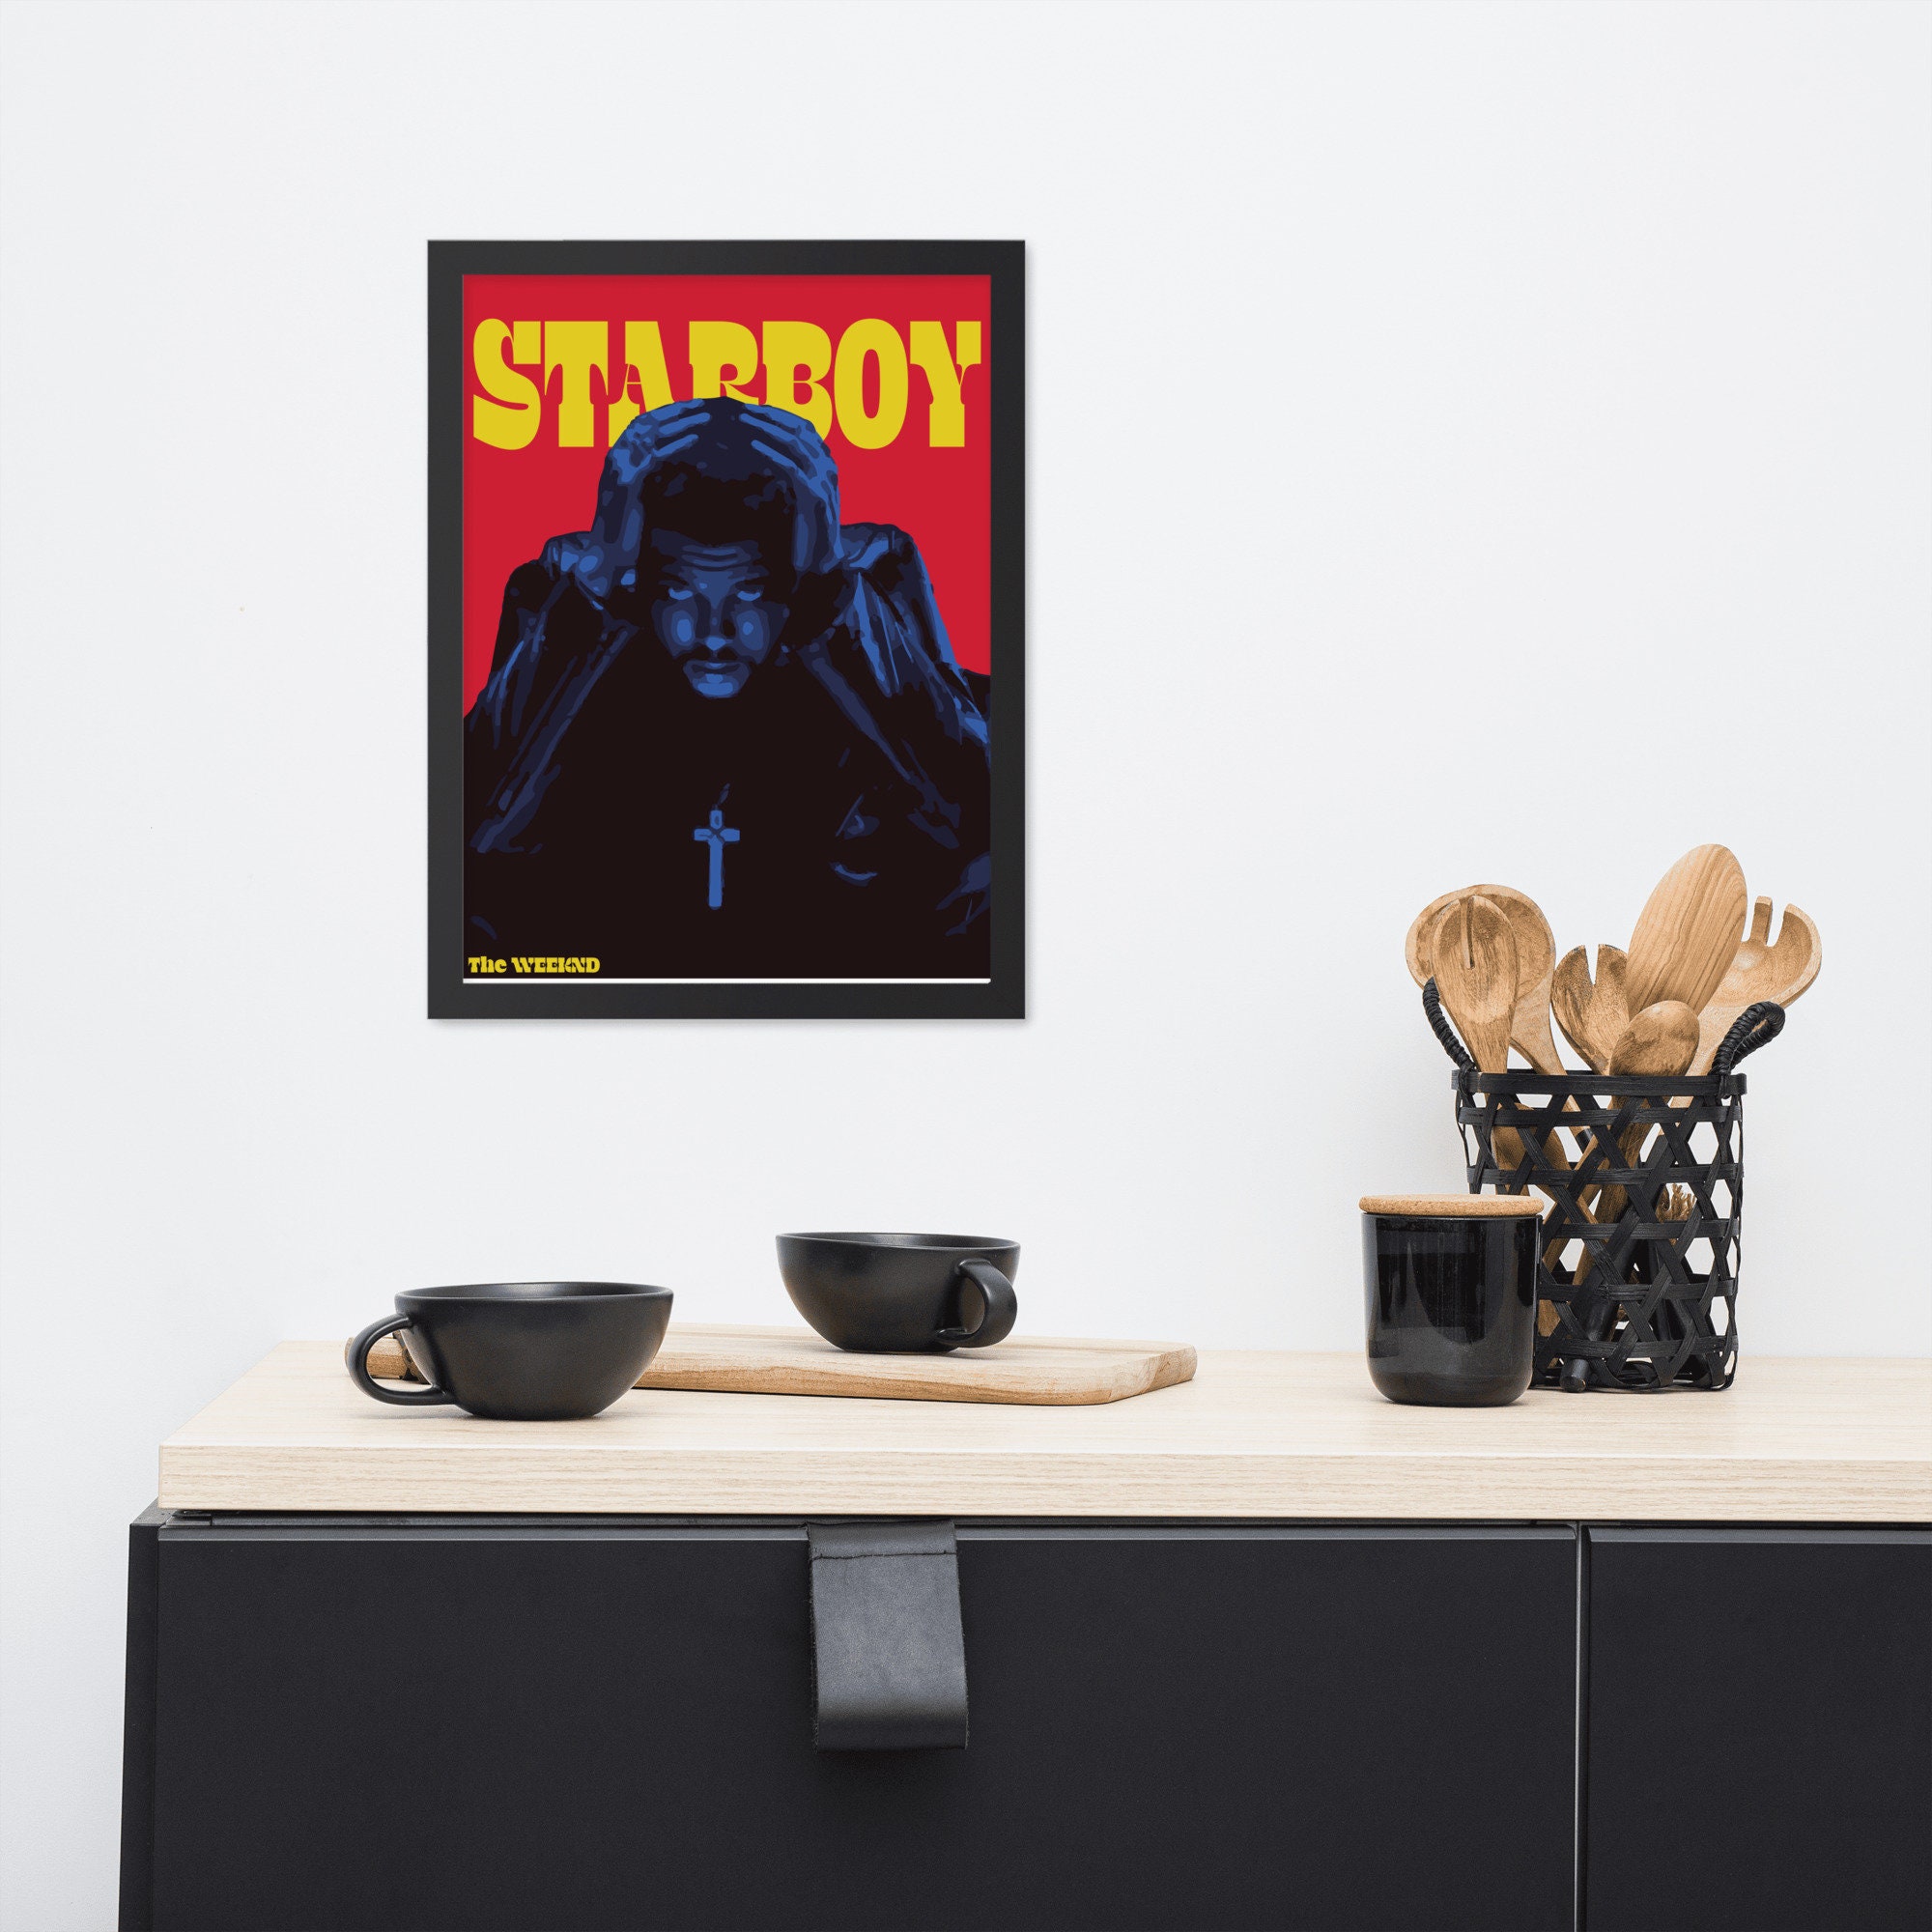 Discover The Weeknd Starboy Digital Poster| Decorative Wall Art | Music Poster